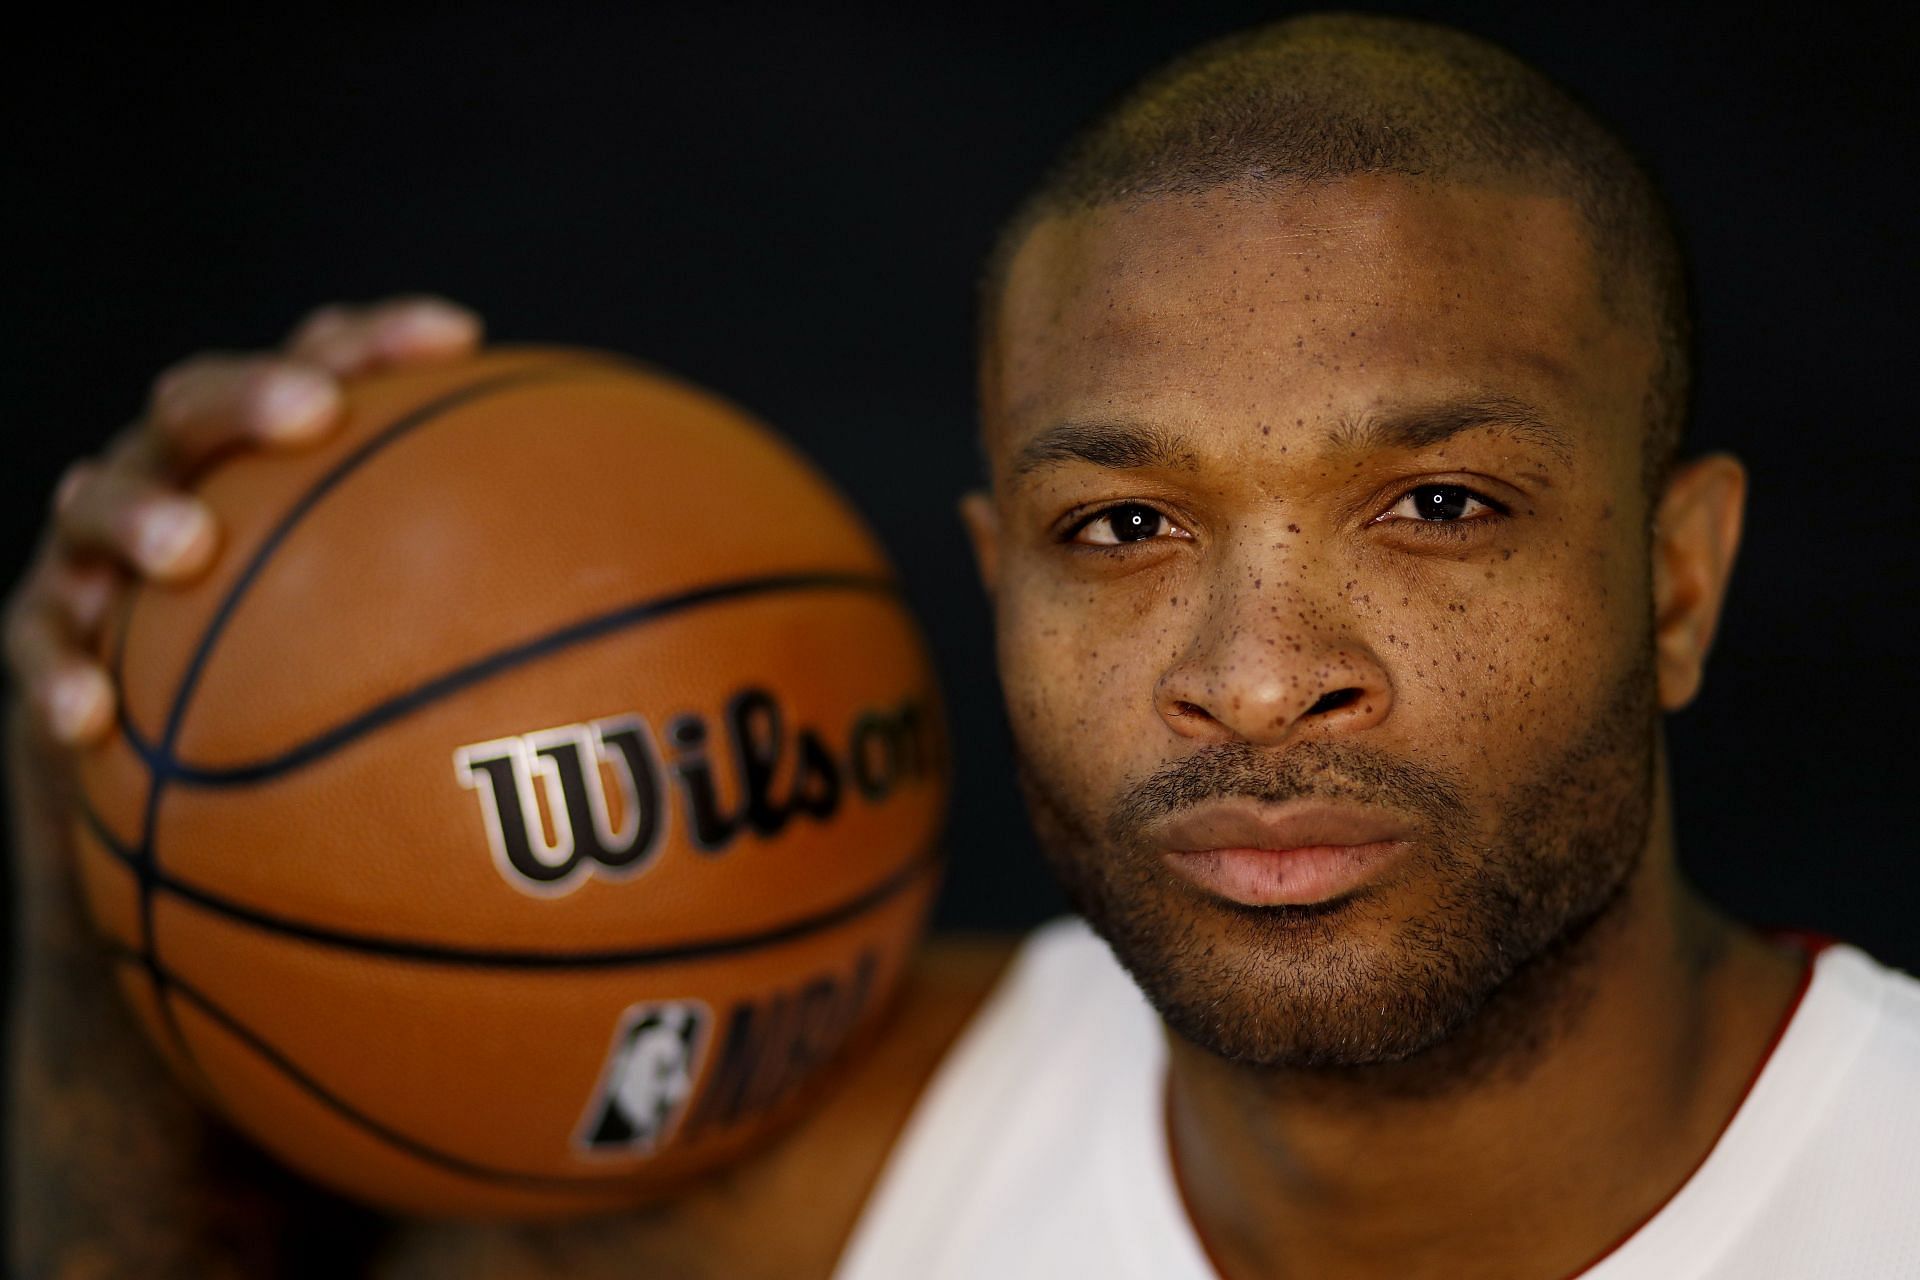 PJ Tucker joins Miami Heat for two years and 15 million